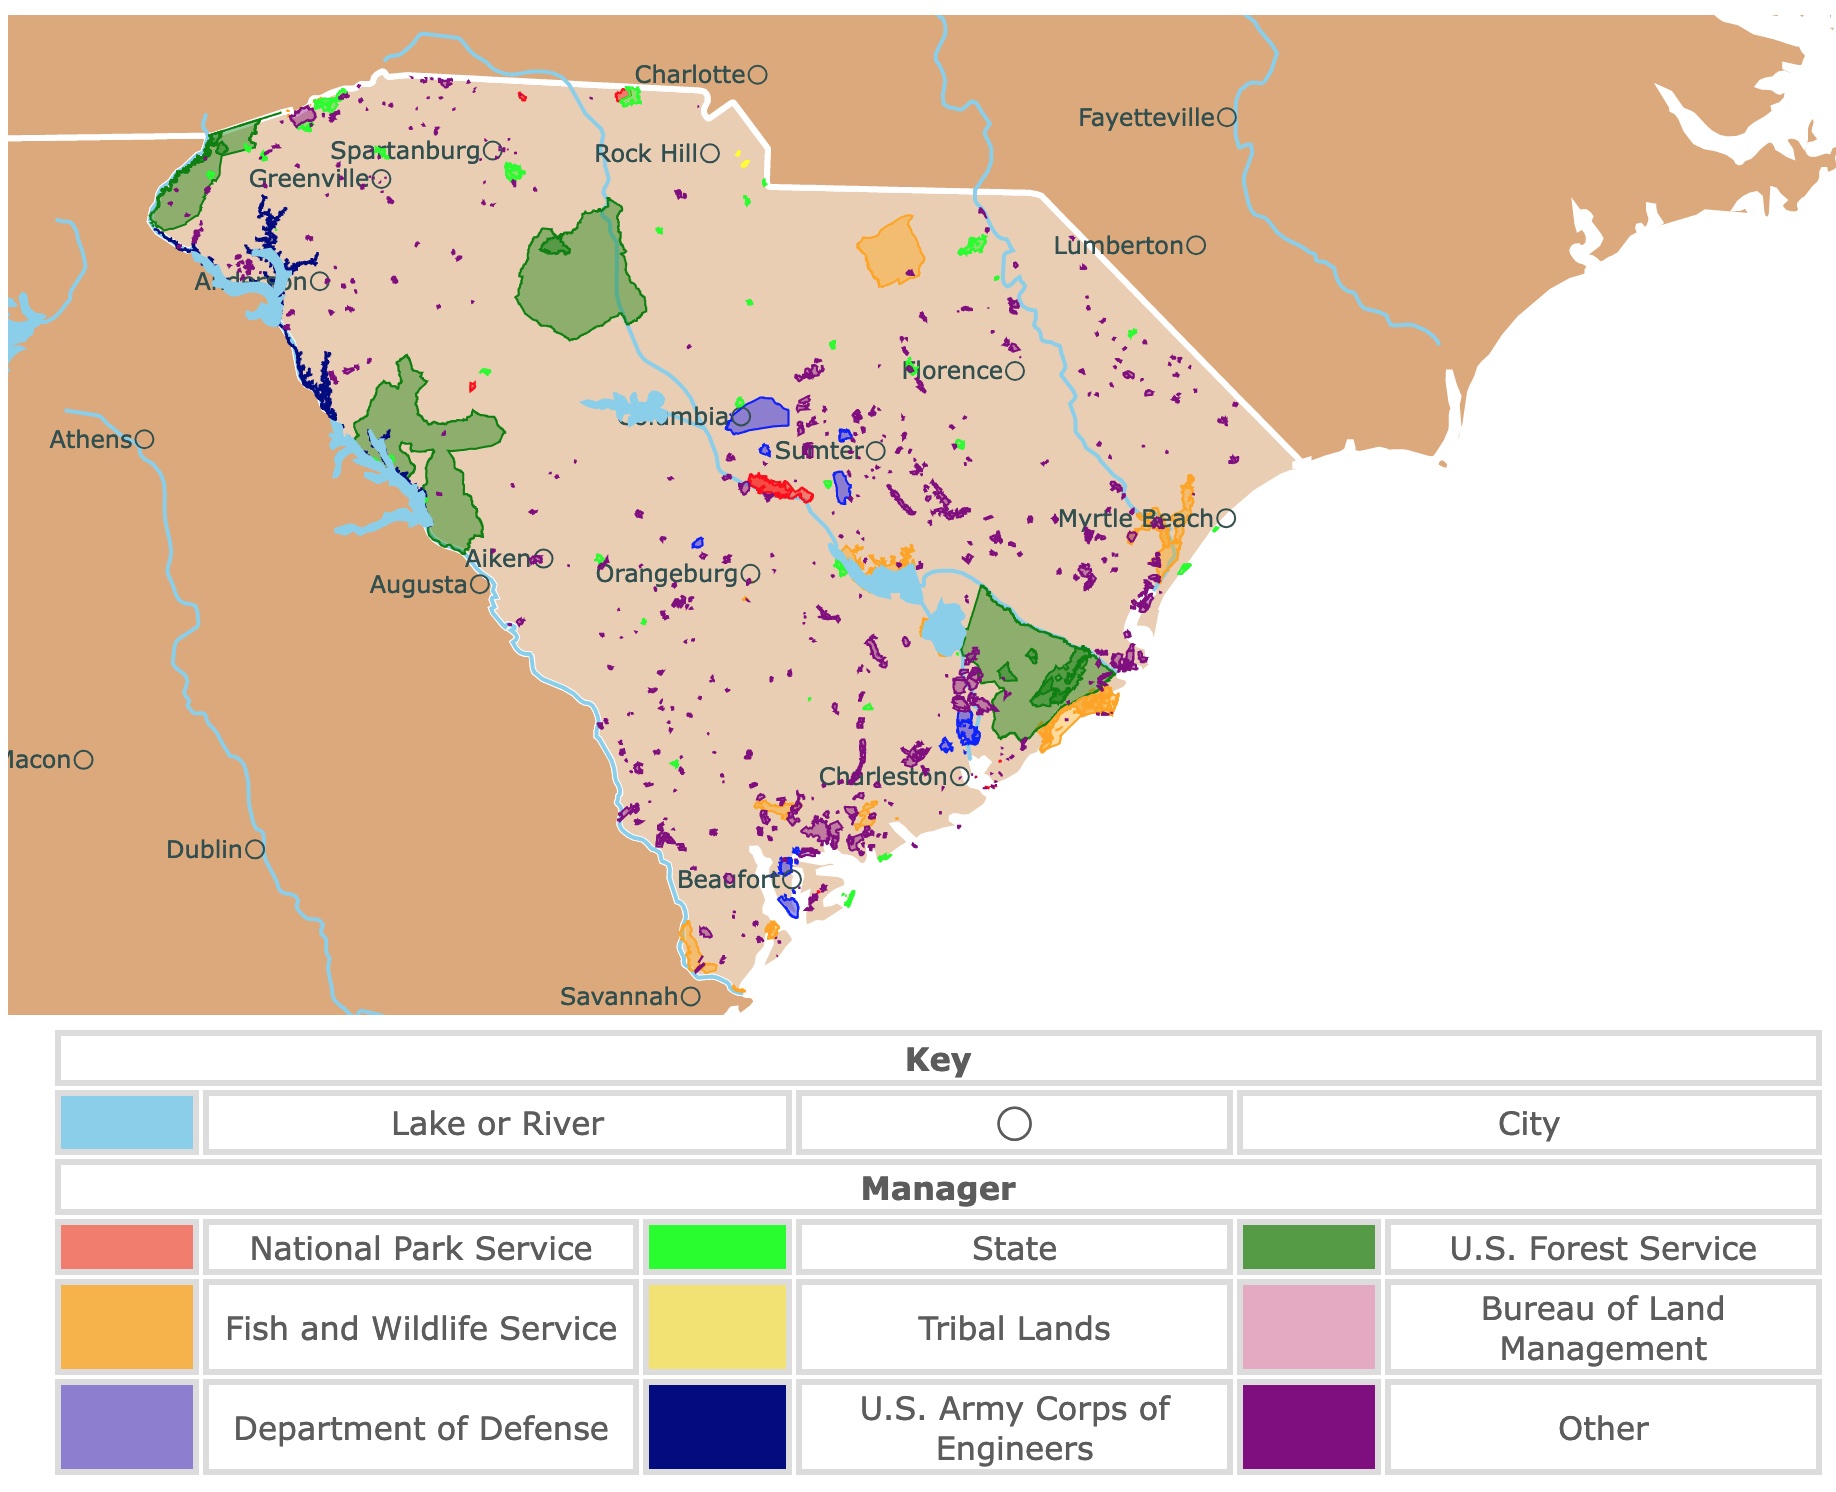 Map of South Carolina's state parks, national parks, forests, and public lands areas